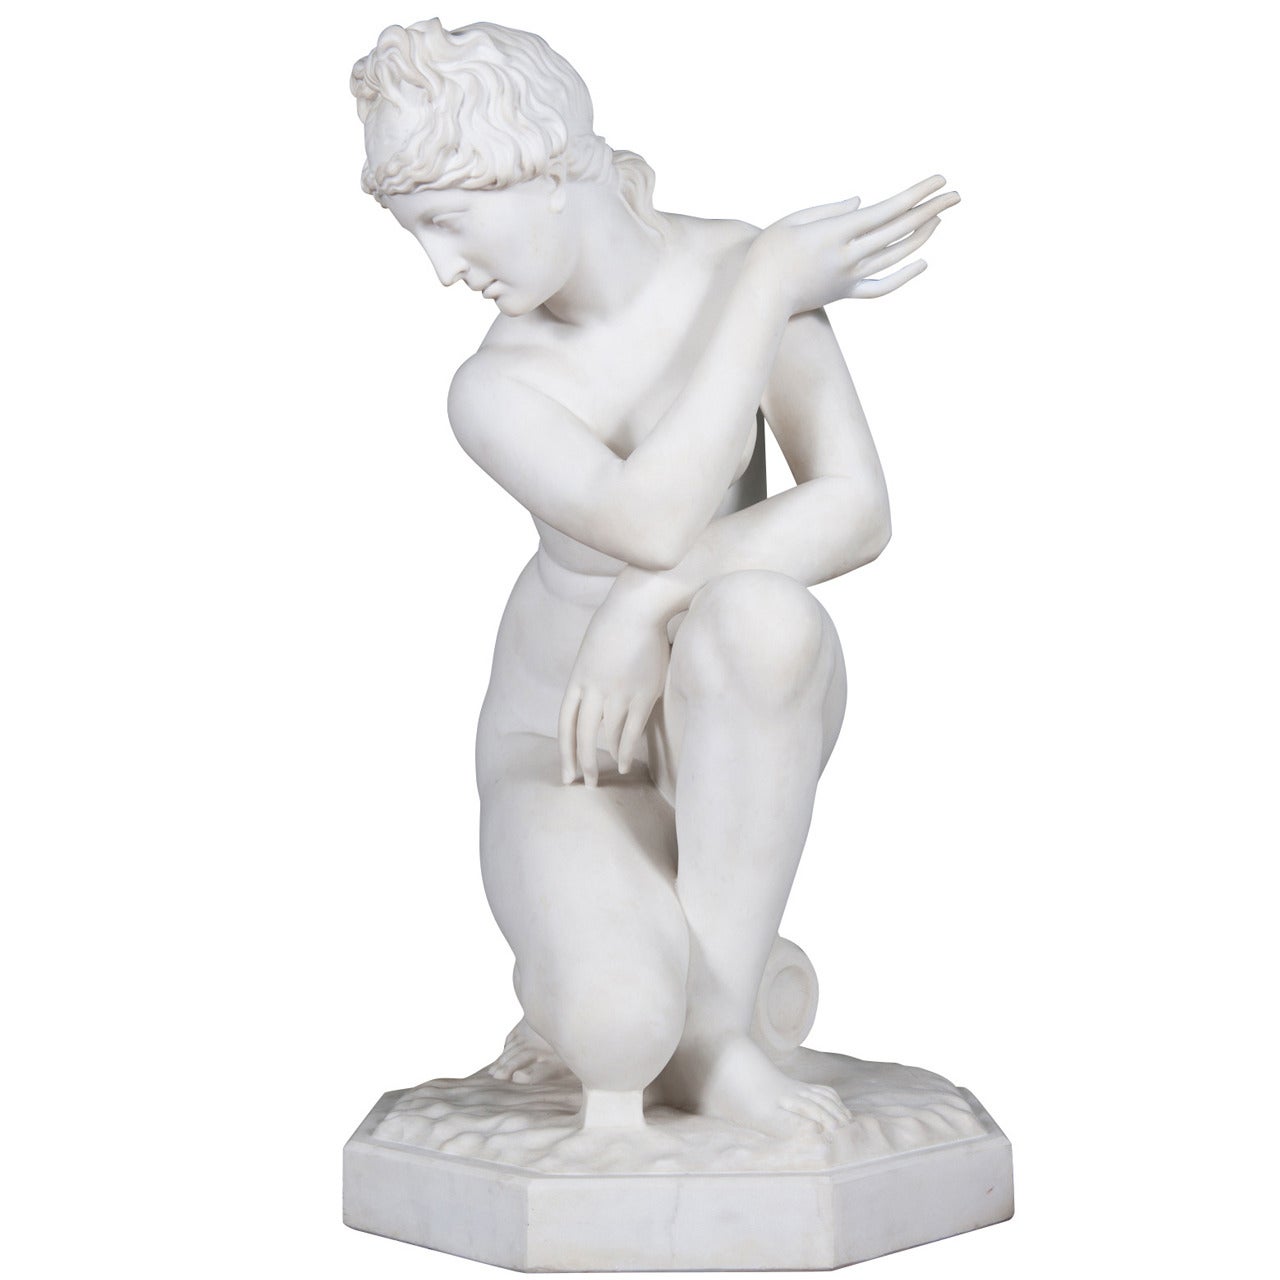 A large and impressive 19th century Italian hand carved white Carrara marble figure of the crouching Venus with octagonal base, set on a 19th century green marble circular pedestal fitted with octagonal top,

circa 1870

Measures: Height 70